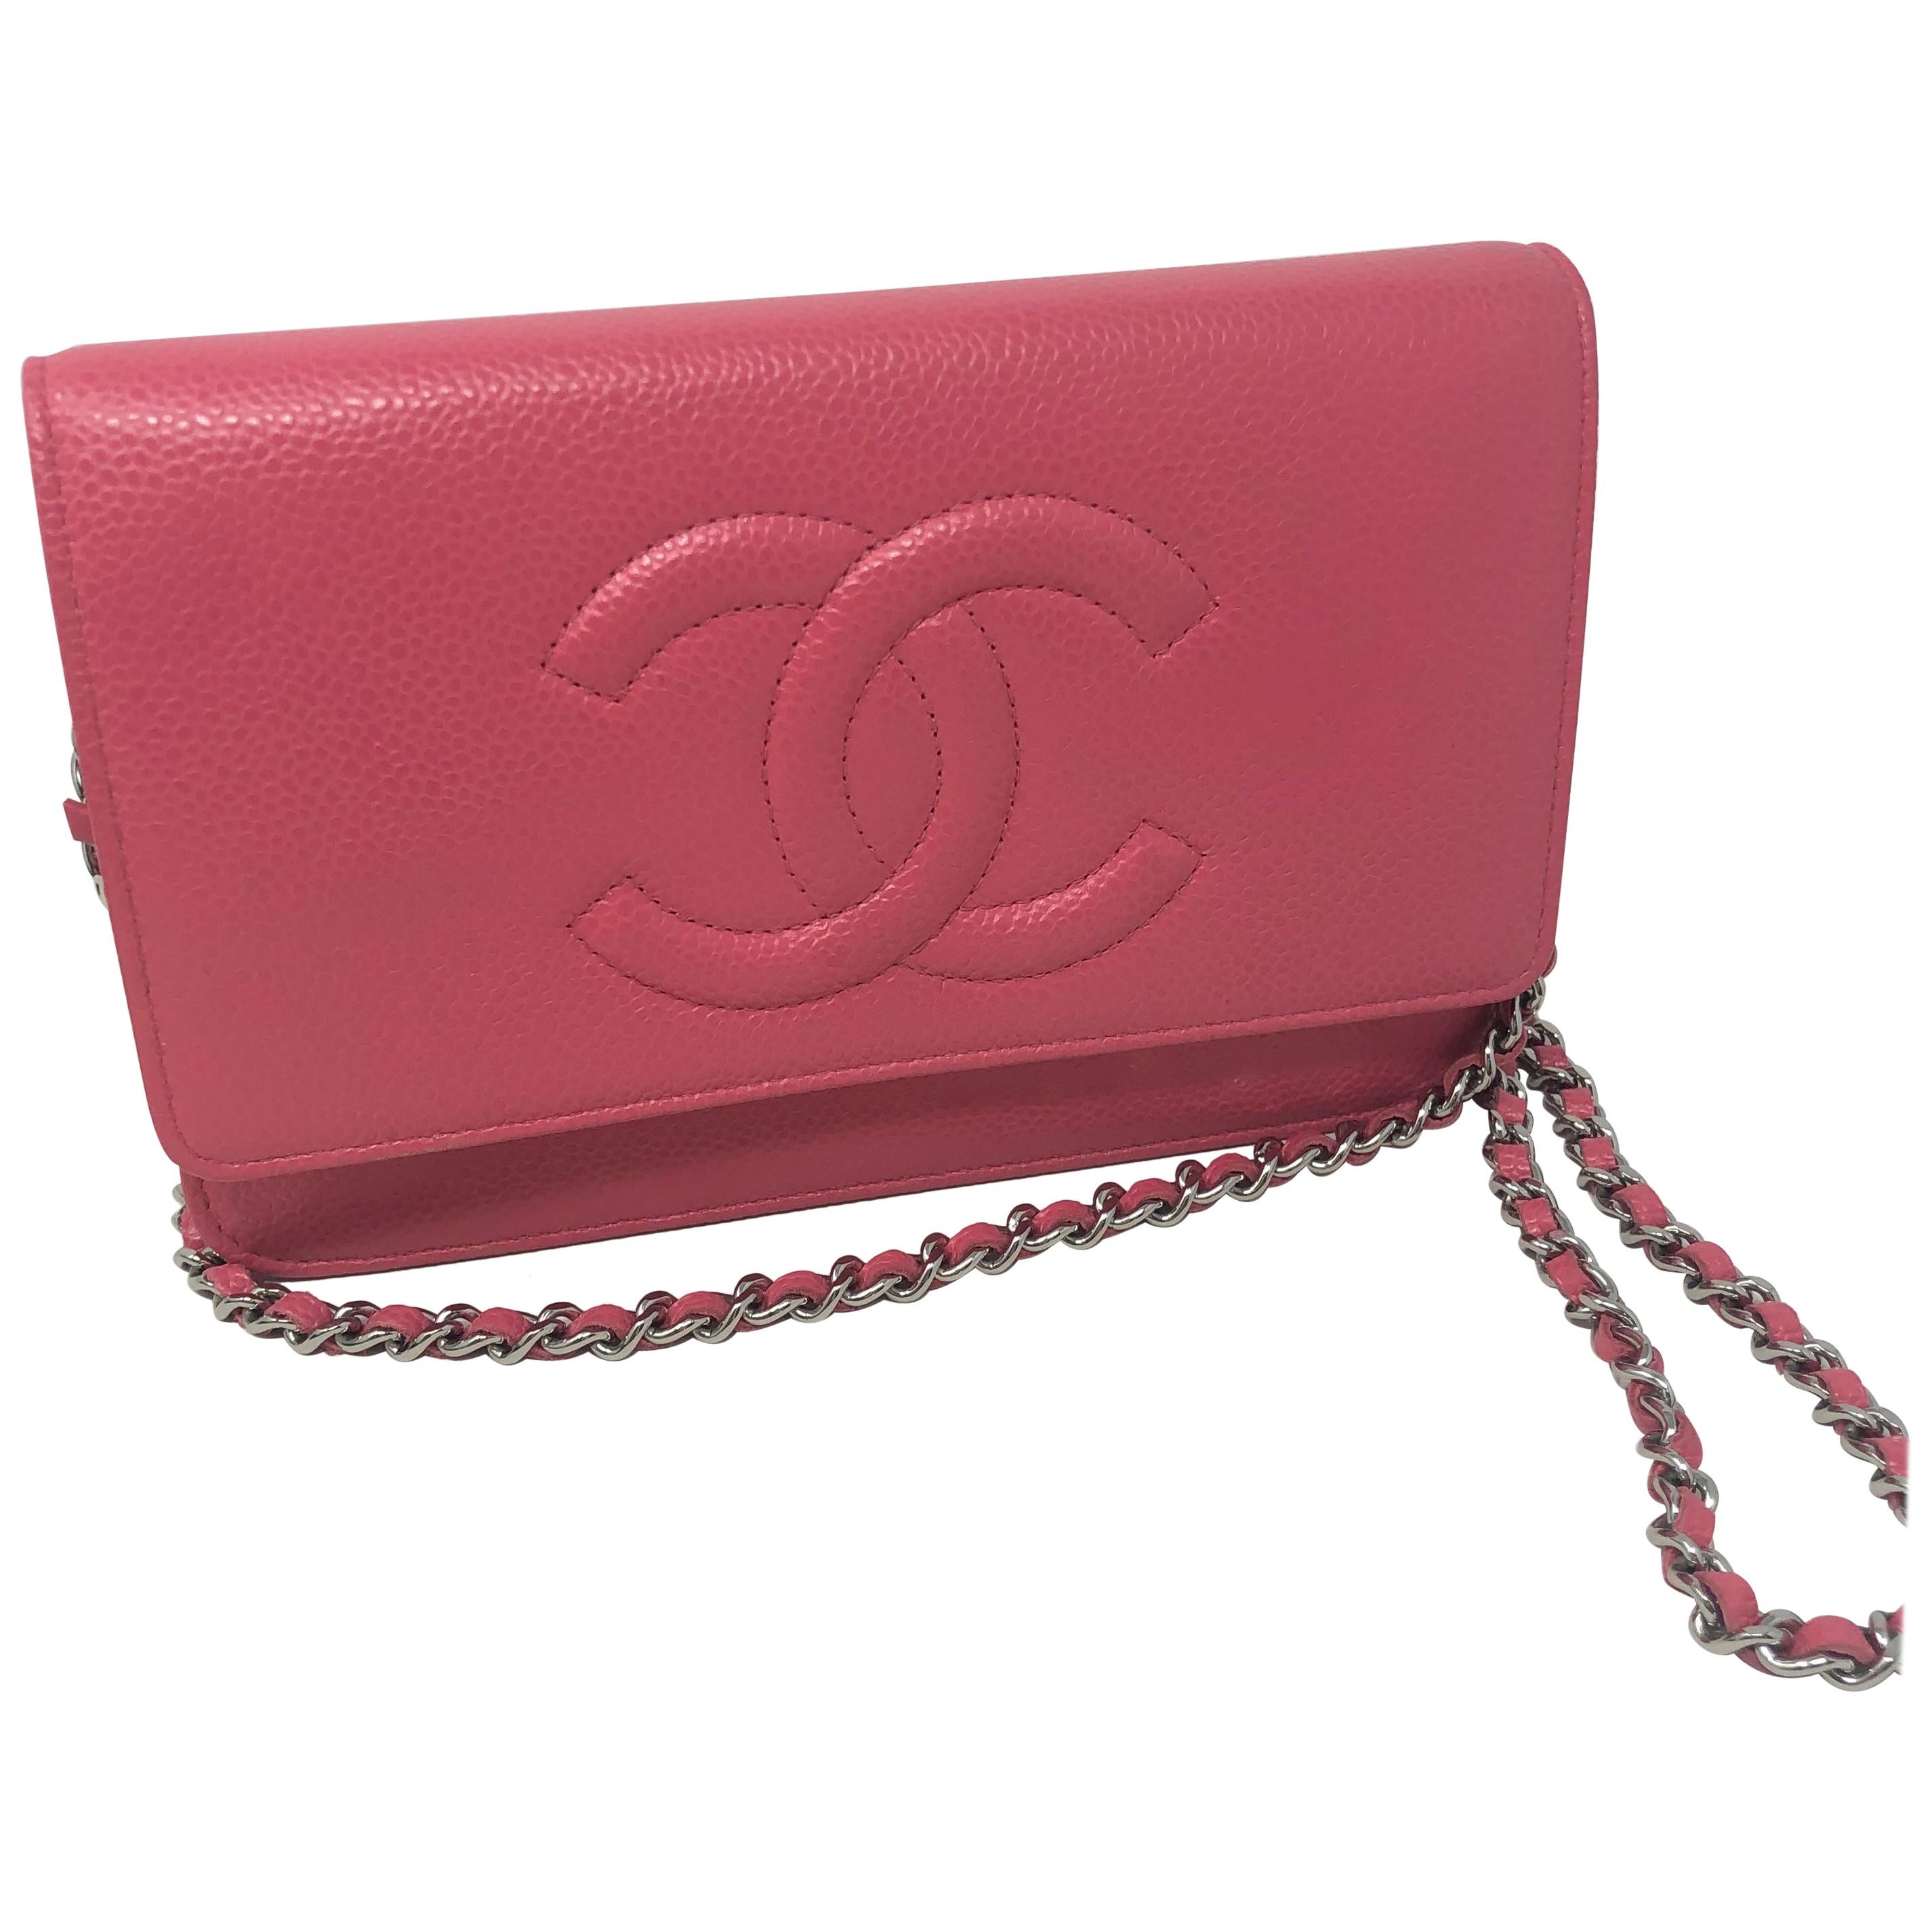 Chanel Pink Caviar Wallet On A Chain 